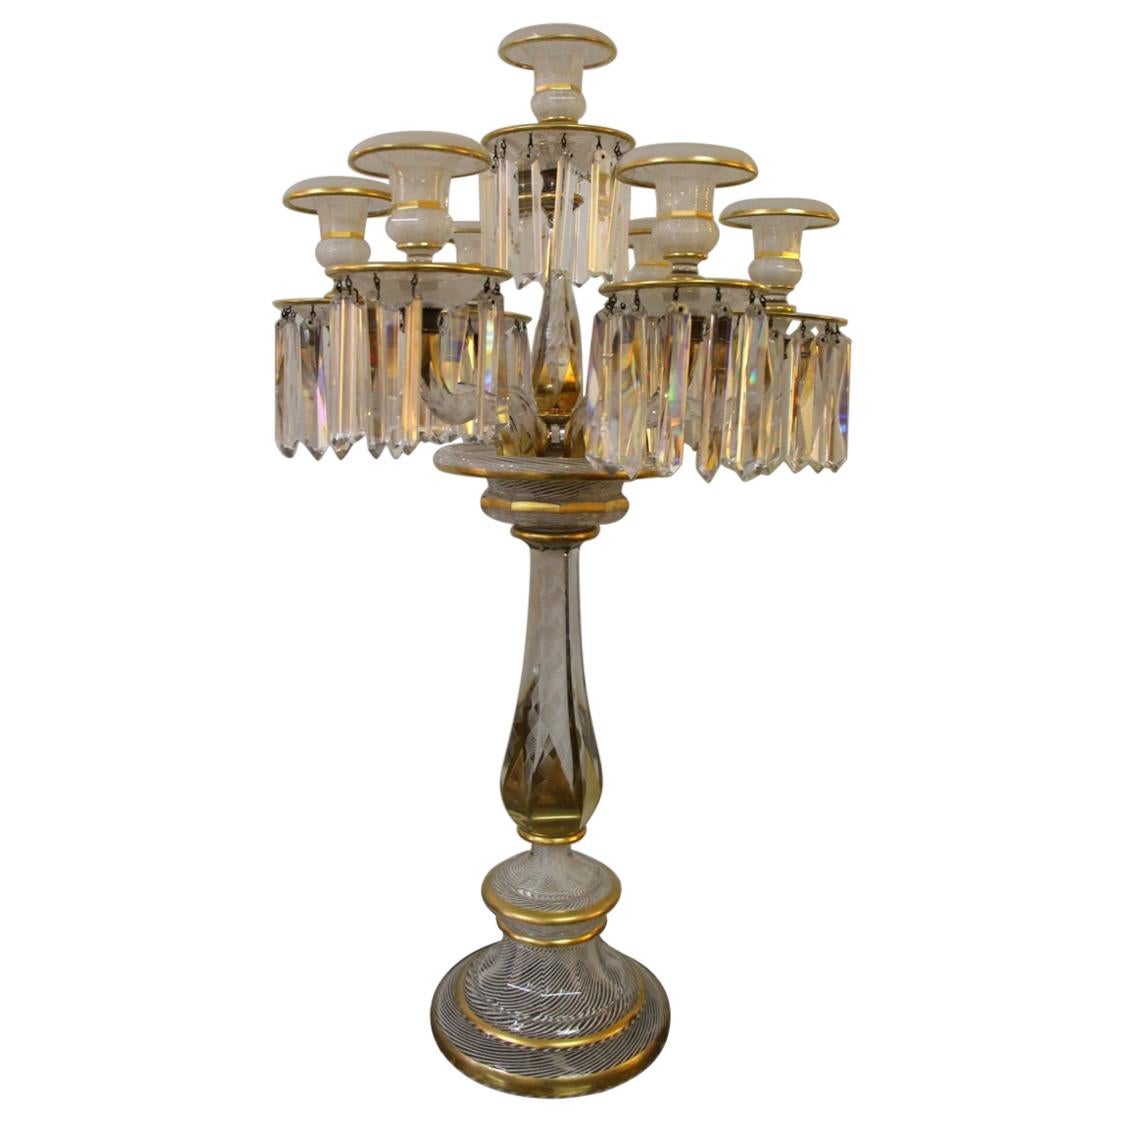 Exquisite Baccarat Crystal Candelabrum Decorated with Latticini For Sale